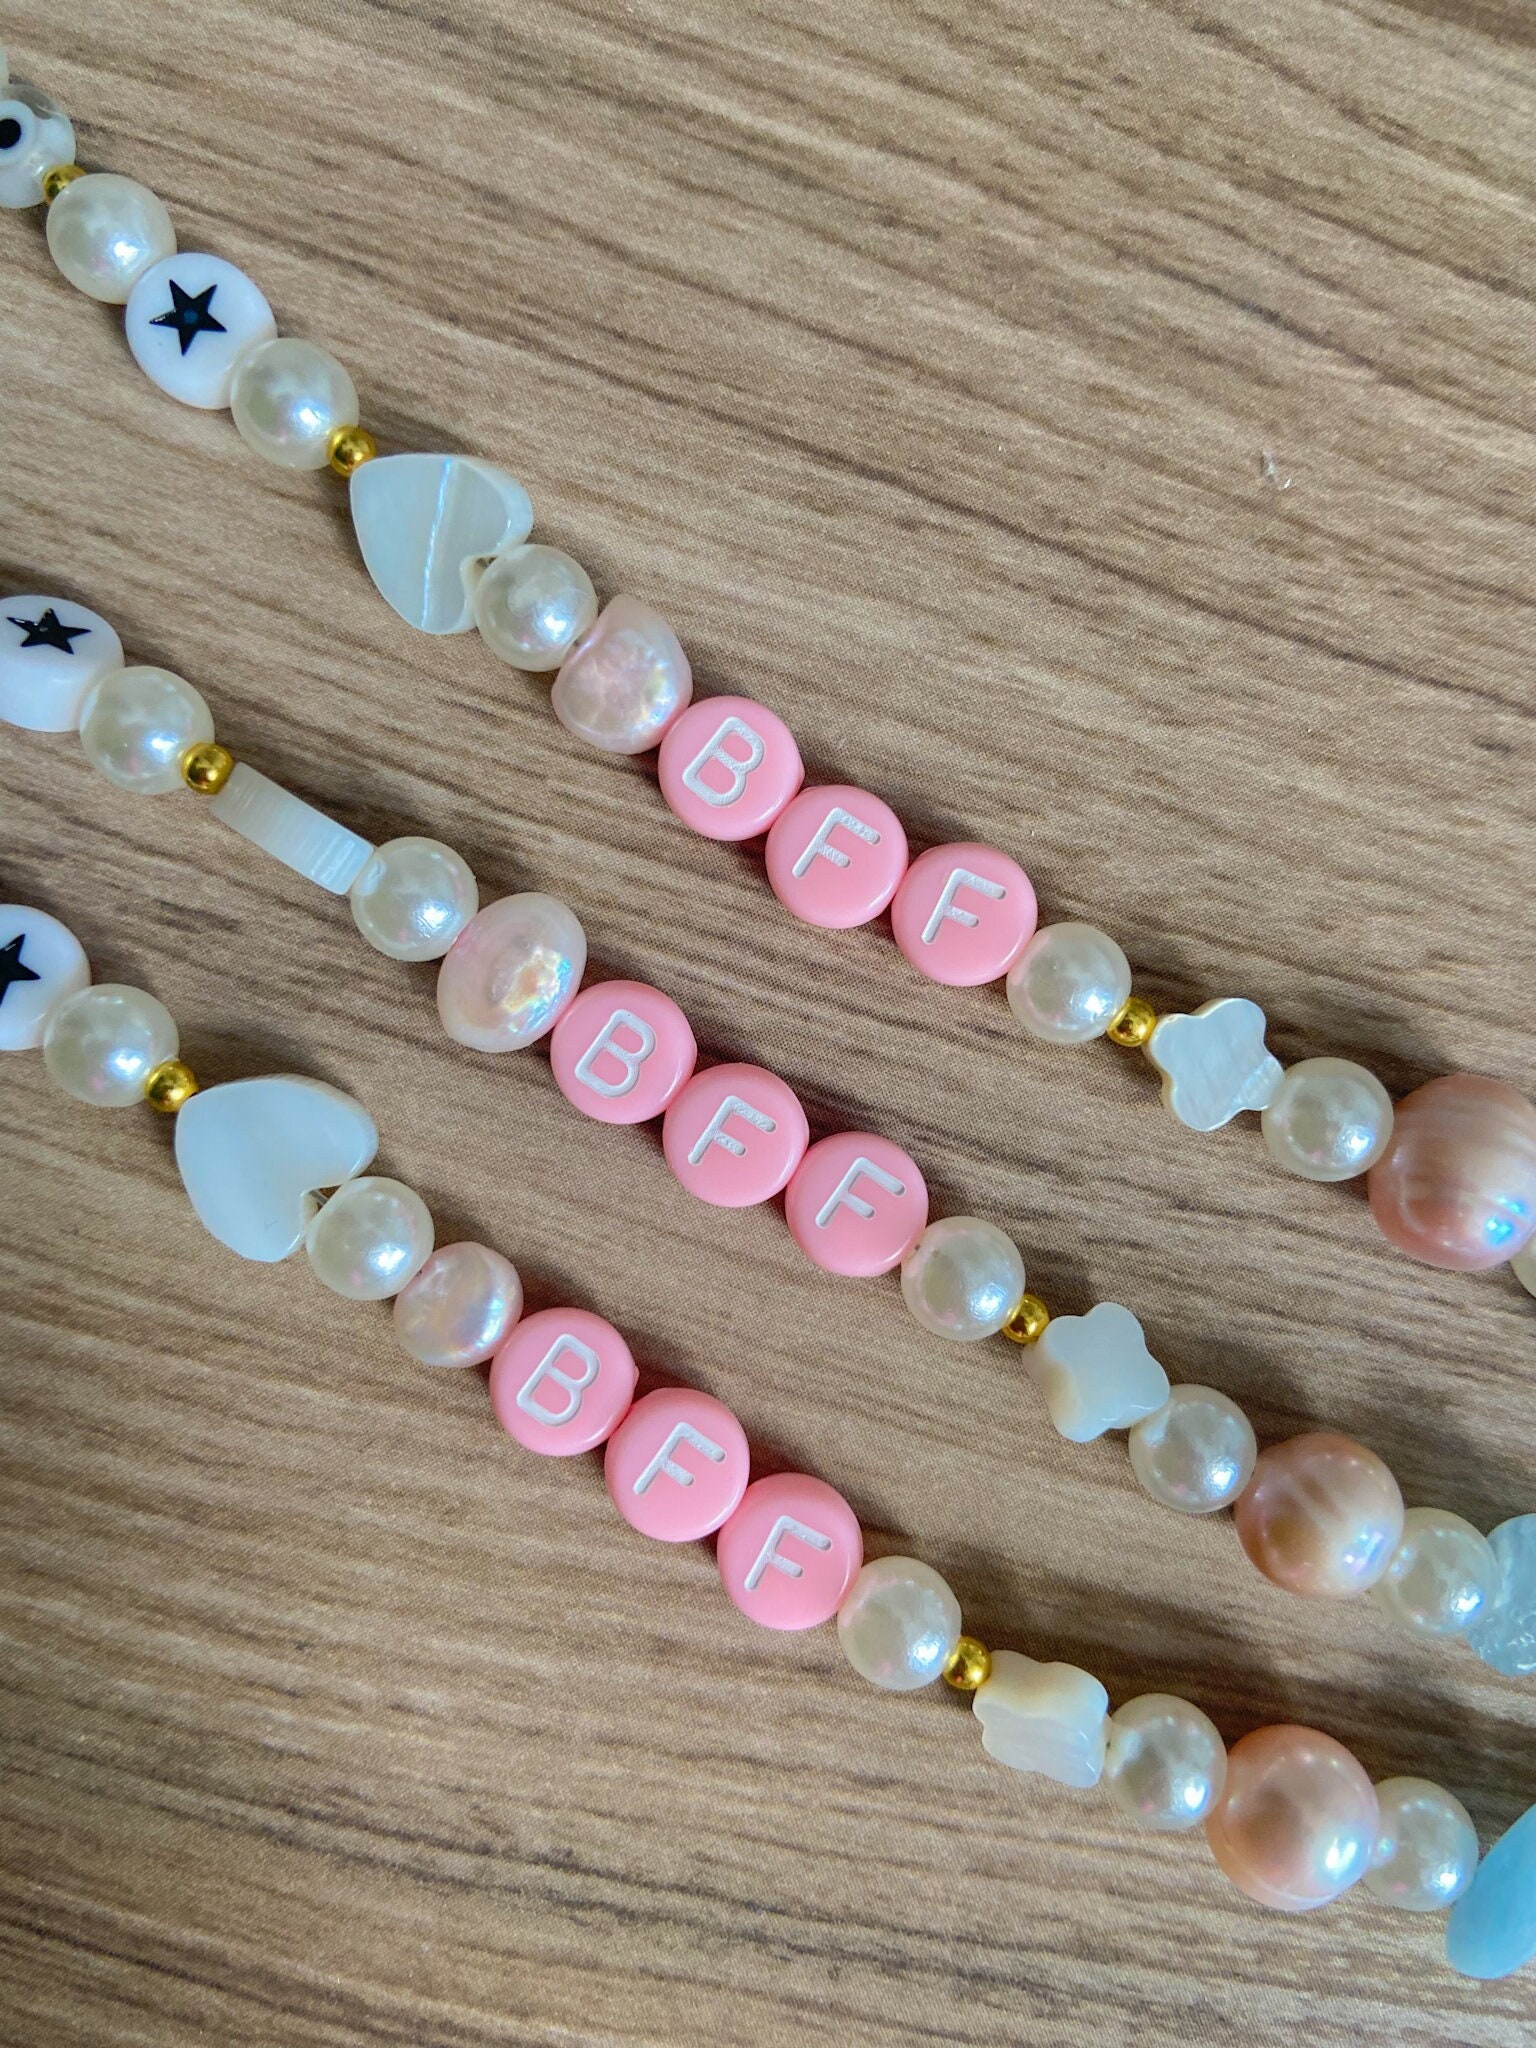  7100 Pcs Flat Clay Beads, Charm Beads and Letter Beads